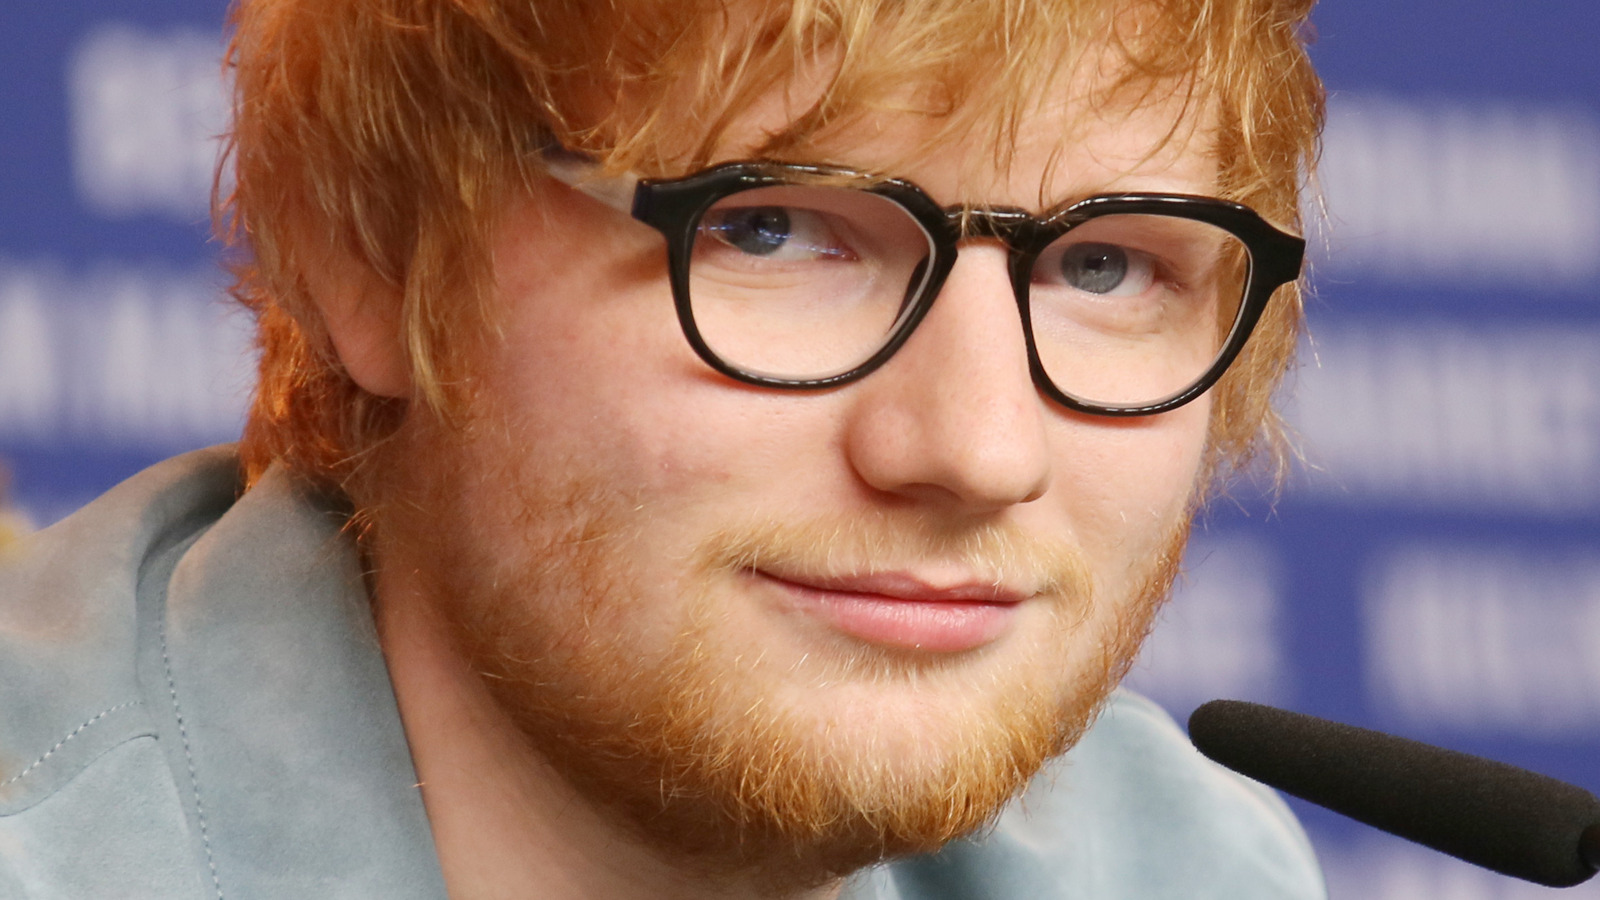 The True Meaning Behind ‘Shivers’ By Ed Sheeran